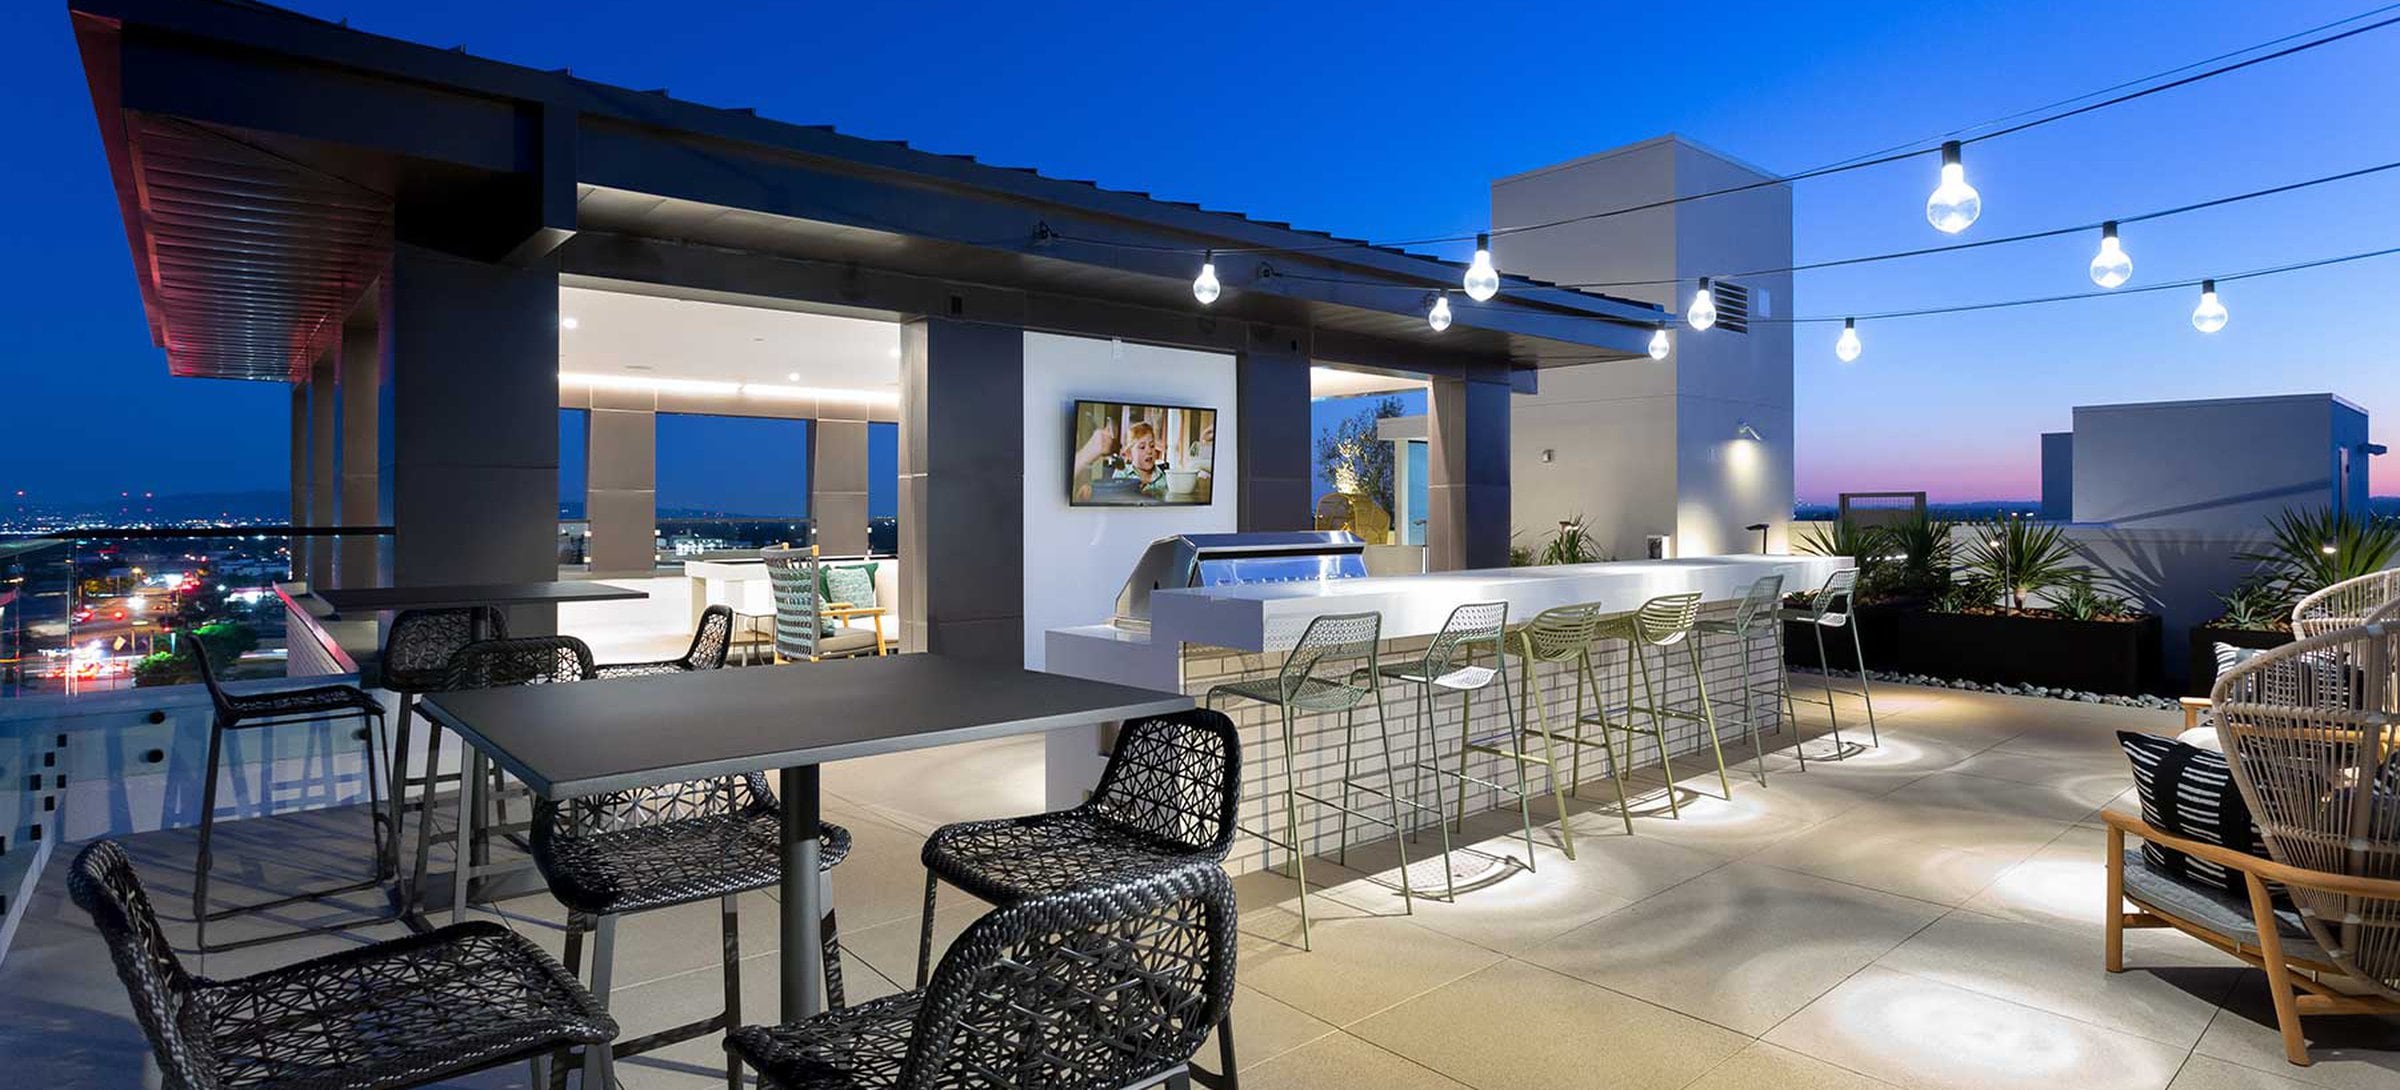 Rooftop terrace with grills, seating and dining areas